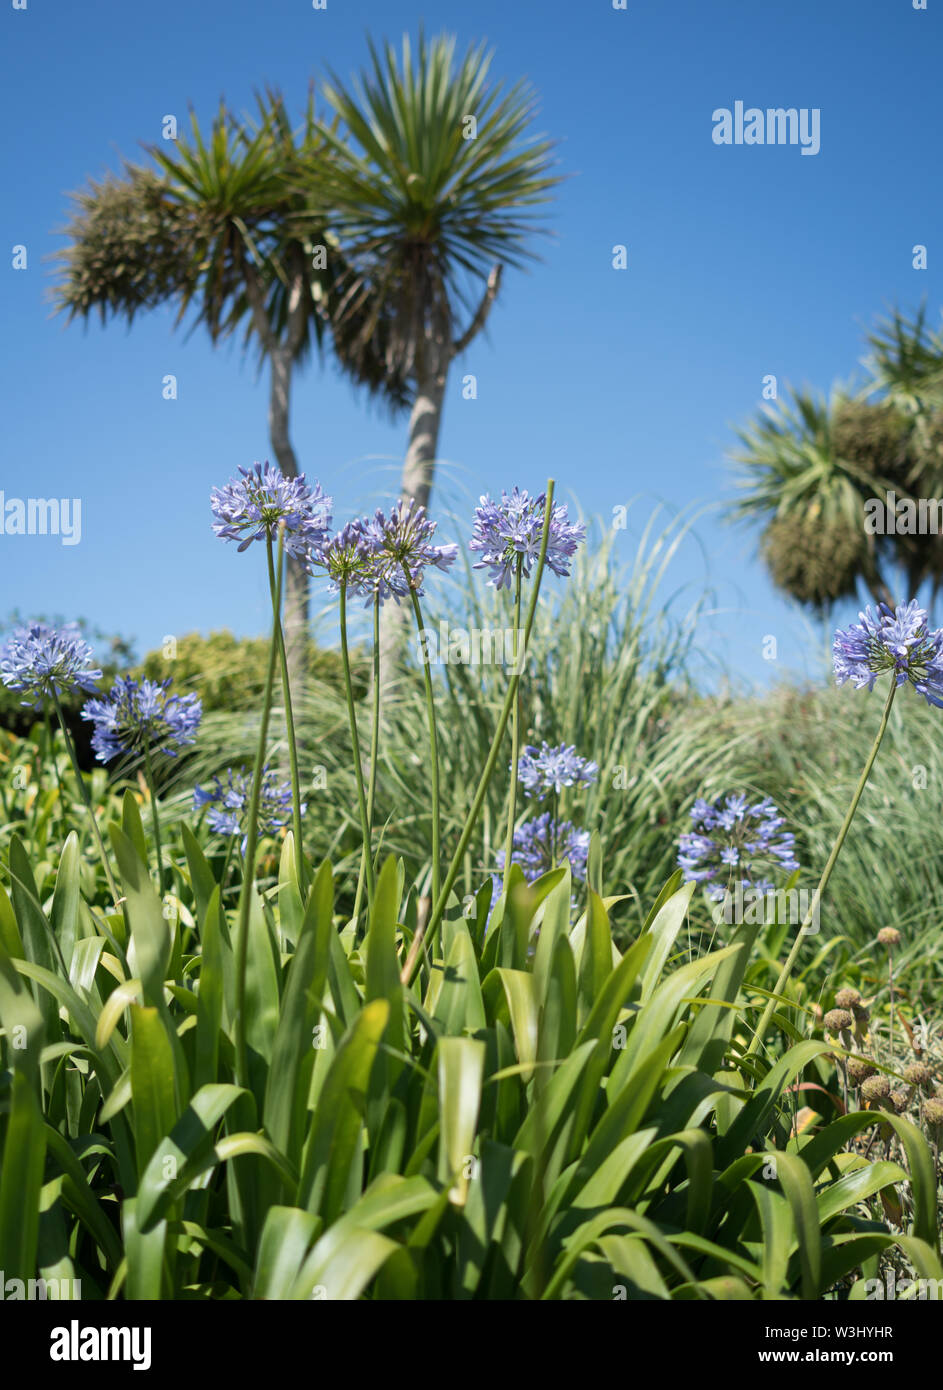 Agapanthus in the rock gardens at Sandbanks with palm trees Stock Photo